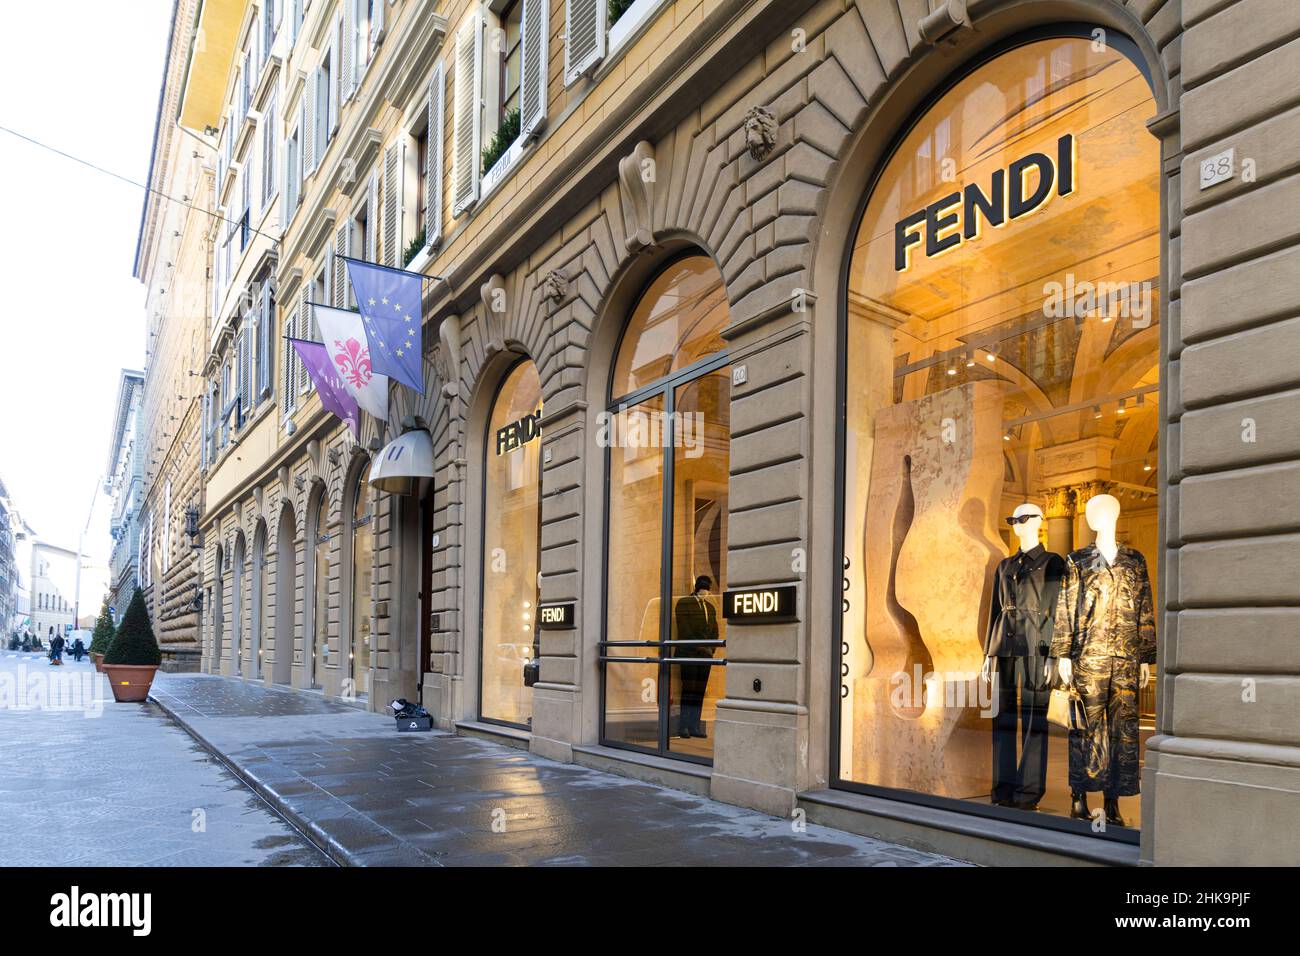 FENDI in Rome, ITALY 2022 (the Main Store in the world)  フェンディ 本店 ローマ イタリア  